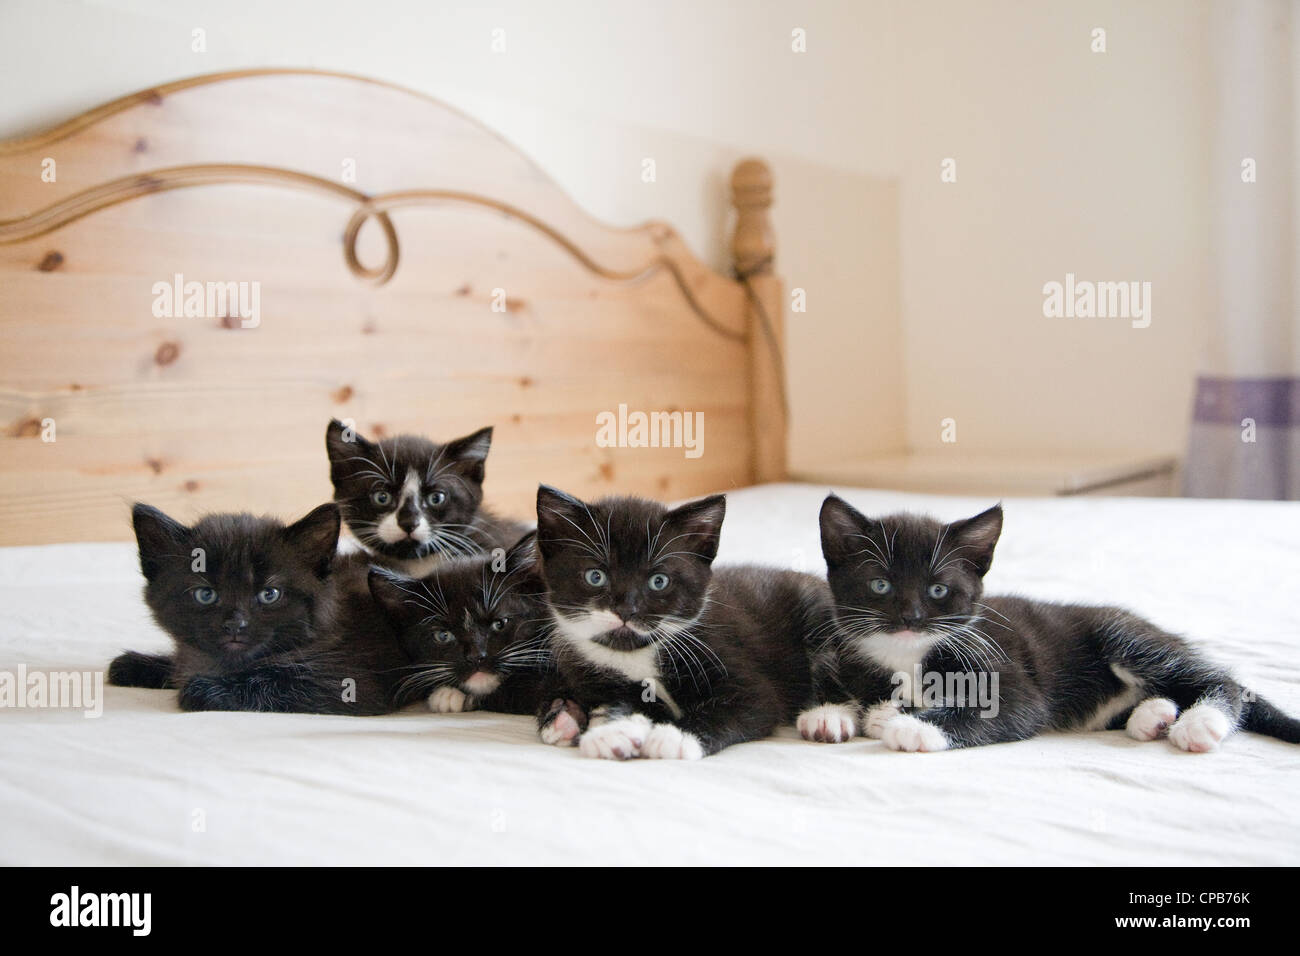 Bundle of adorable black and white kittens Stock Photo